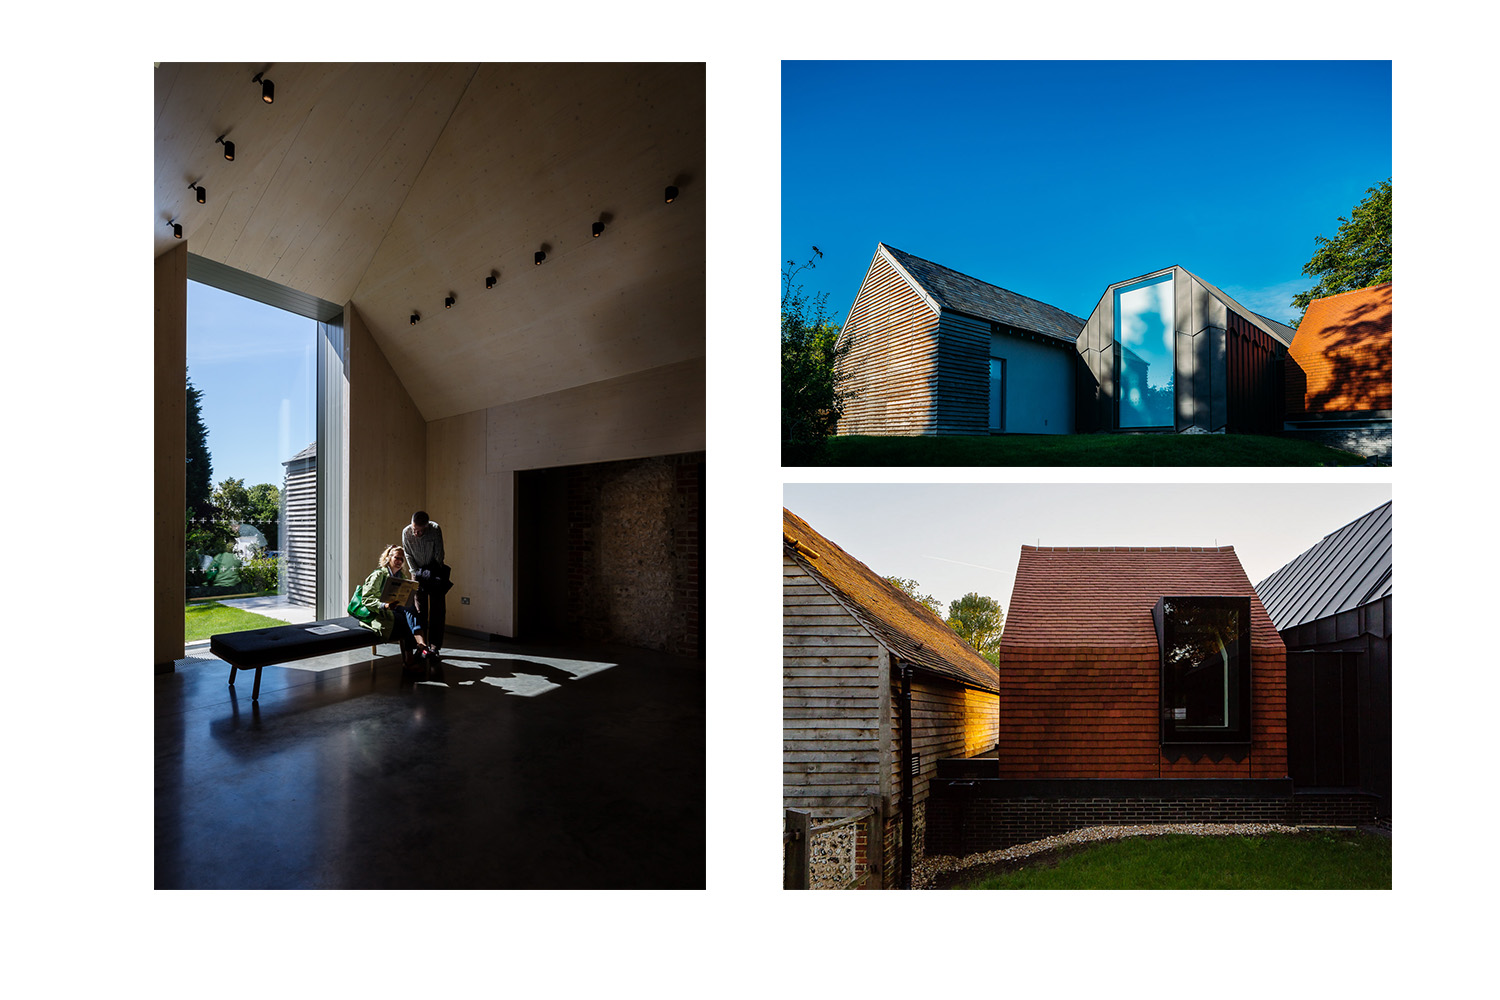  Ditchling Art and Craft Museum by Adam Richards. Ditchling. East Sussex, England 